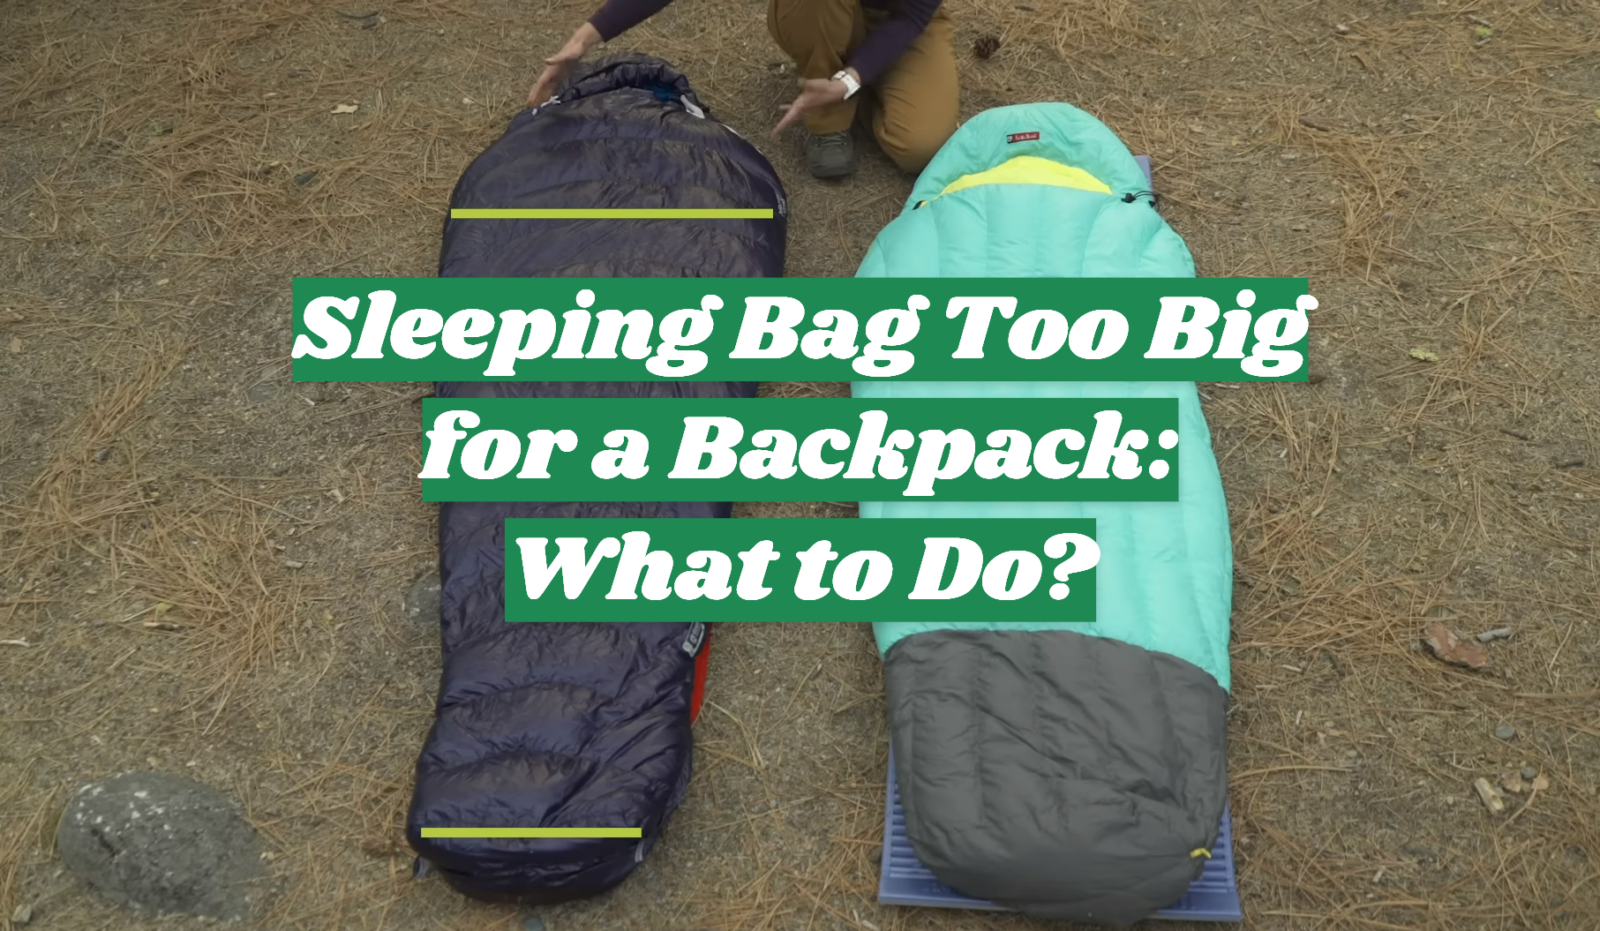 Sleeping Bag Too Big for a Backpack: What to Do?